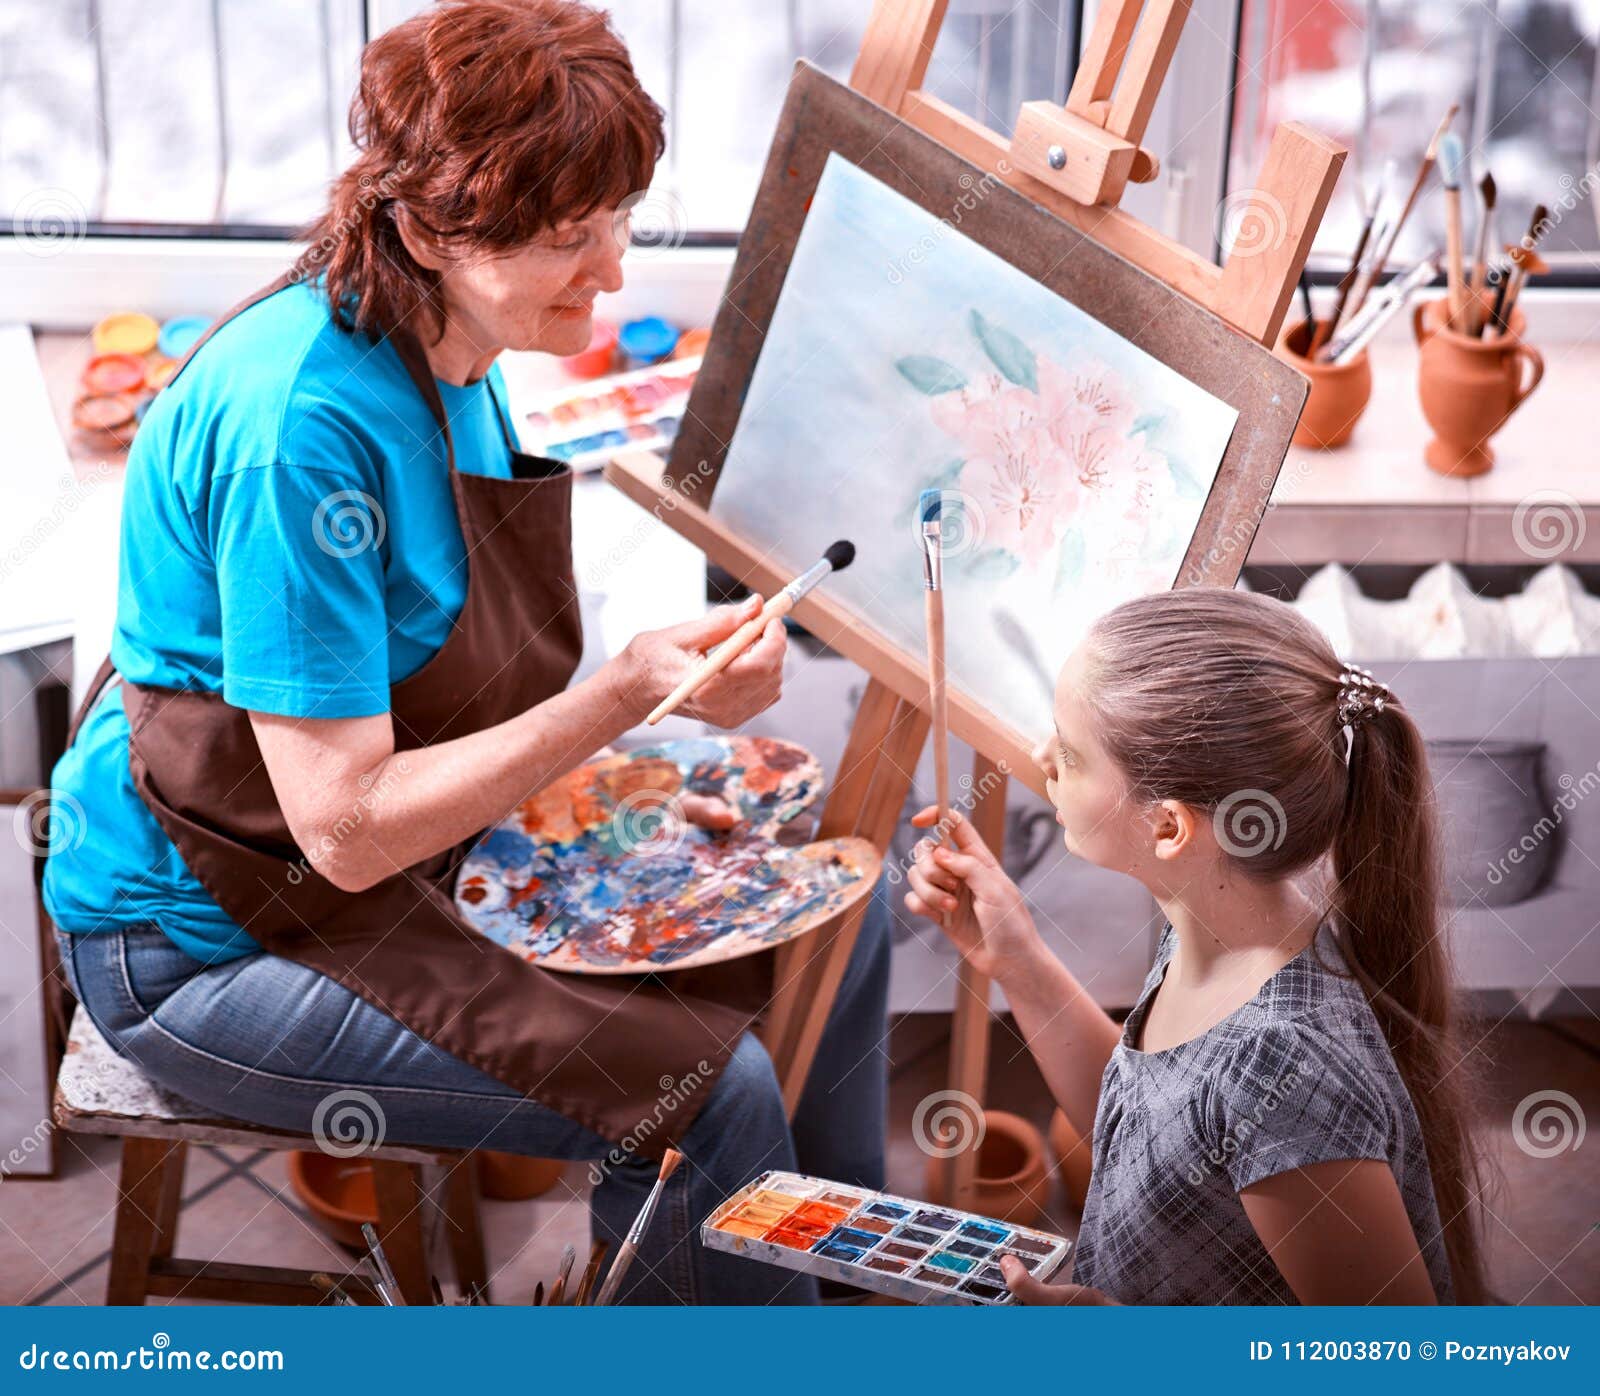 artist painting easel in studio. authentic grandmother and kids.